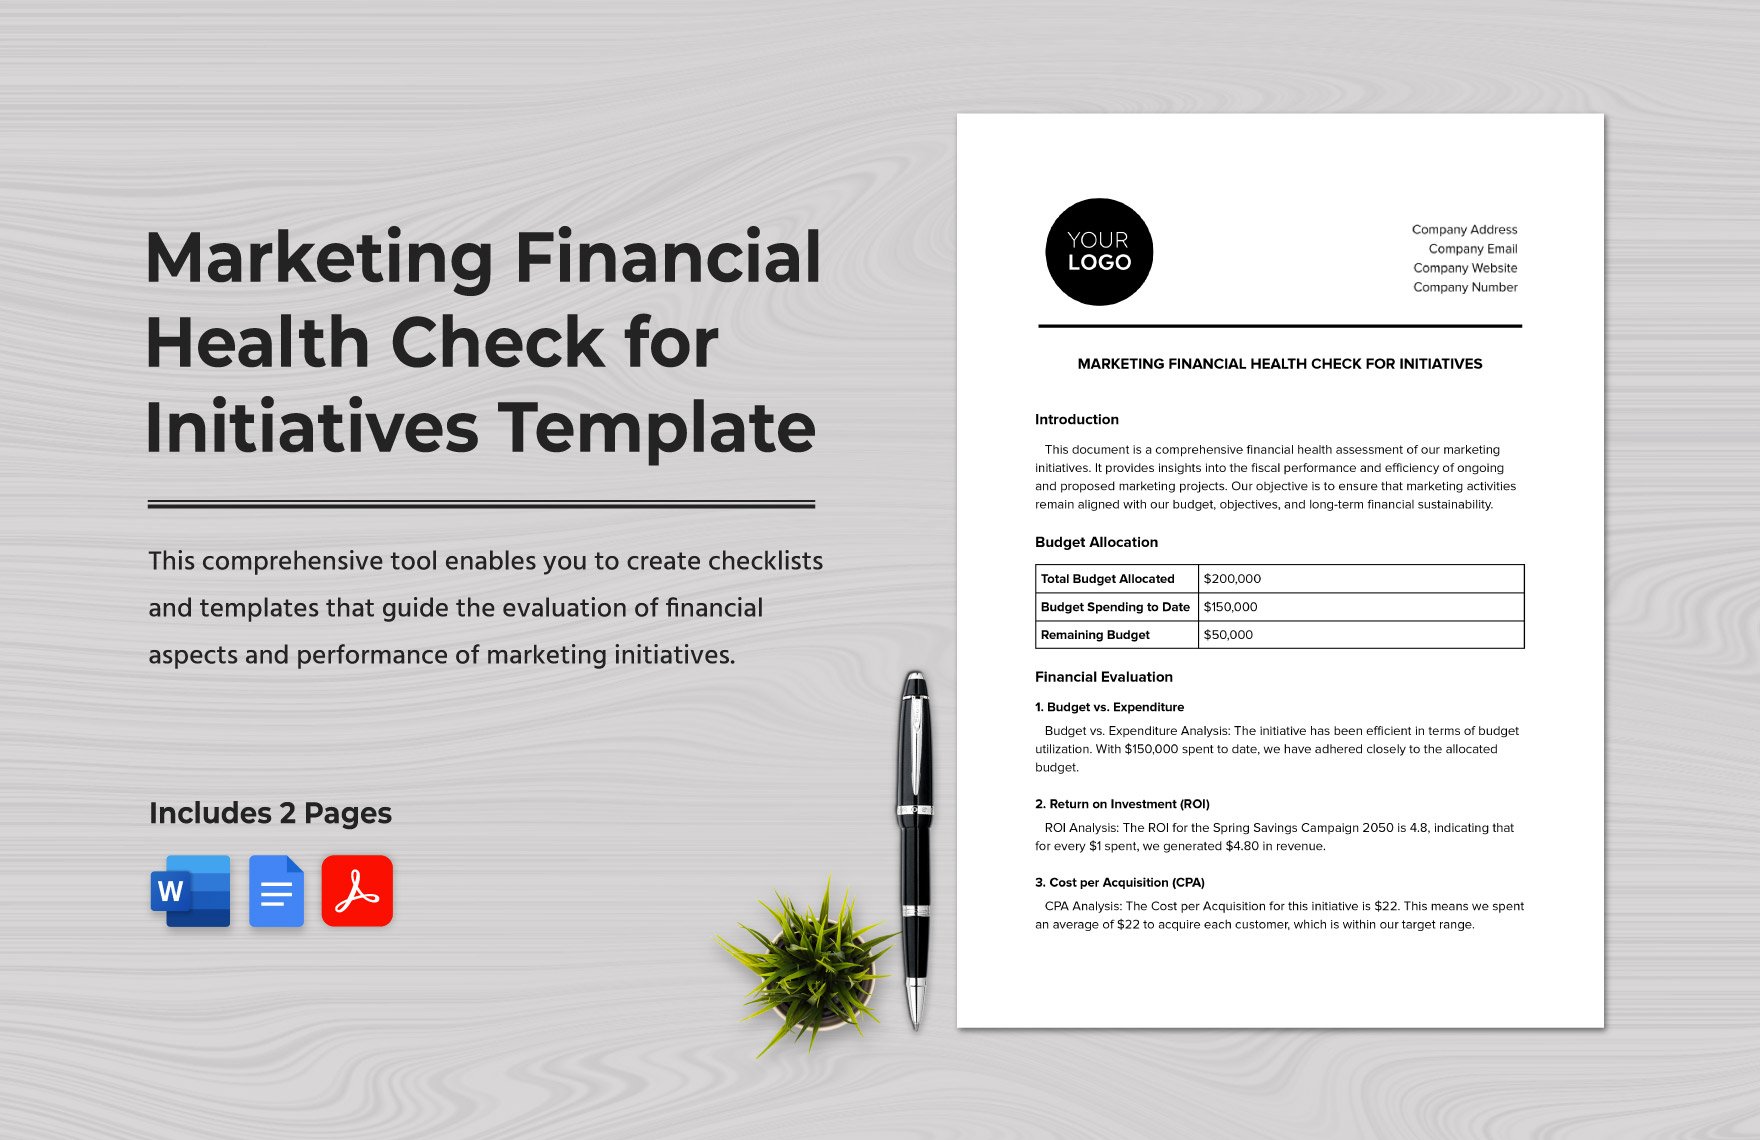 Marketing Financial Health Check for Initiatives Template